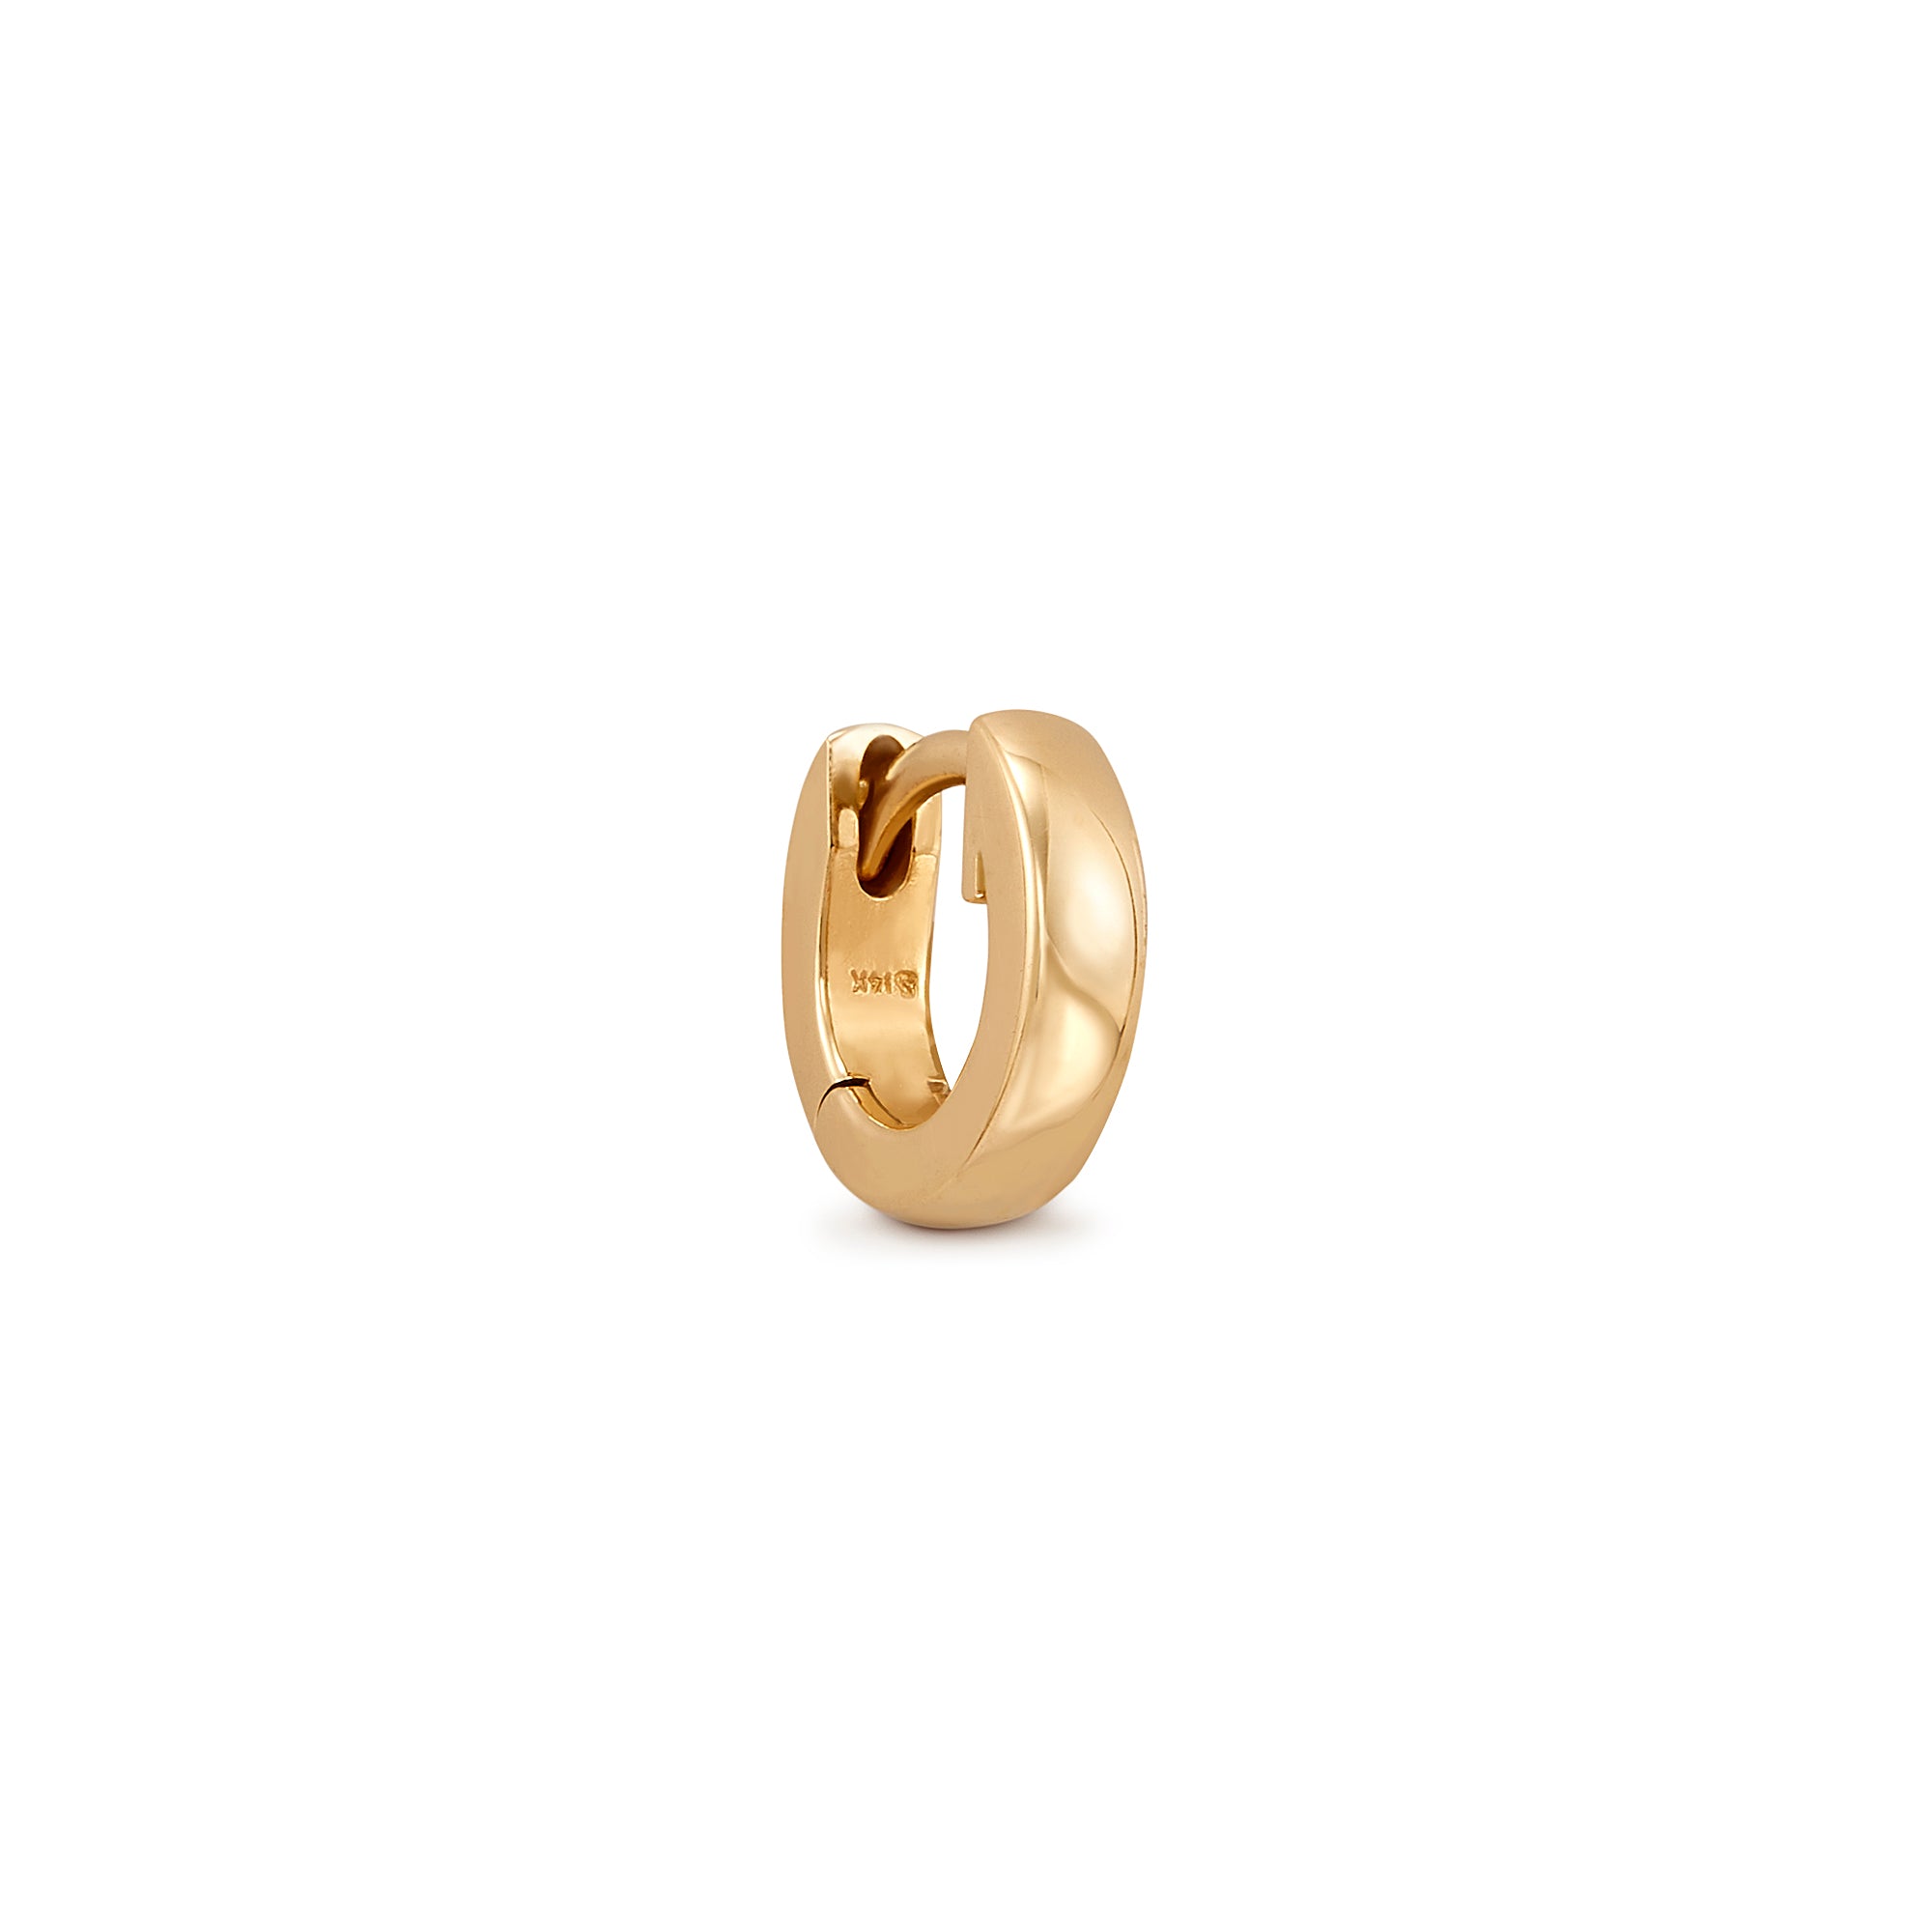 The Chubby Hinged Hoop hugs your earlobe while giving you something to notice. This chunky modern hoop is made from 14k gold